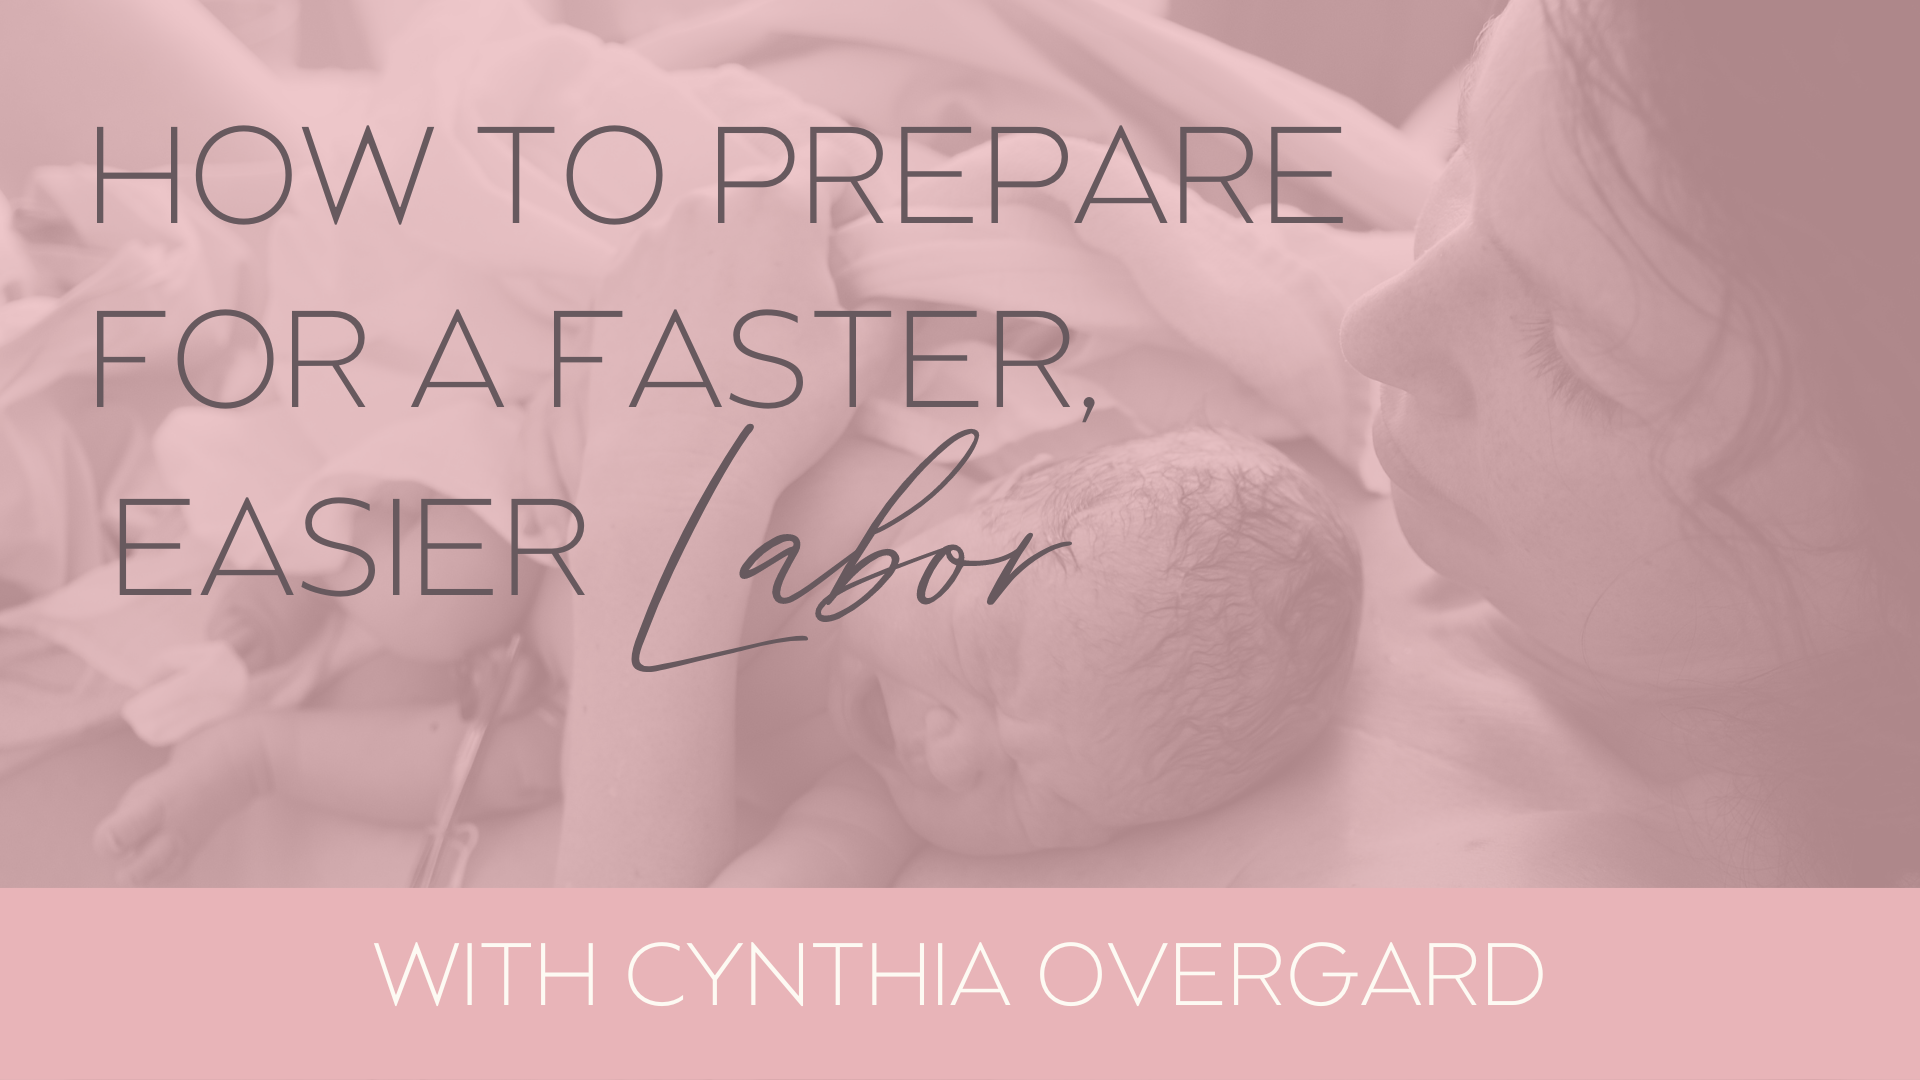 How To Prepare for a Faster, Easier Labor